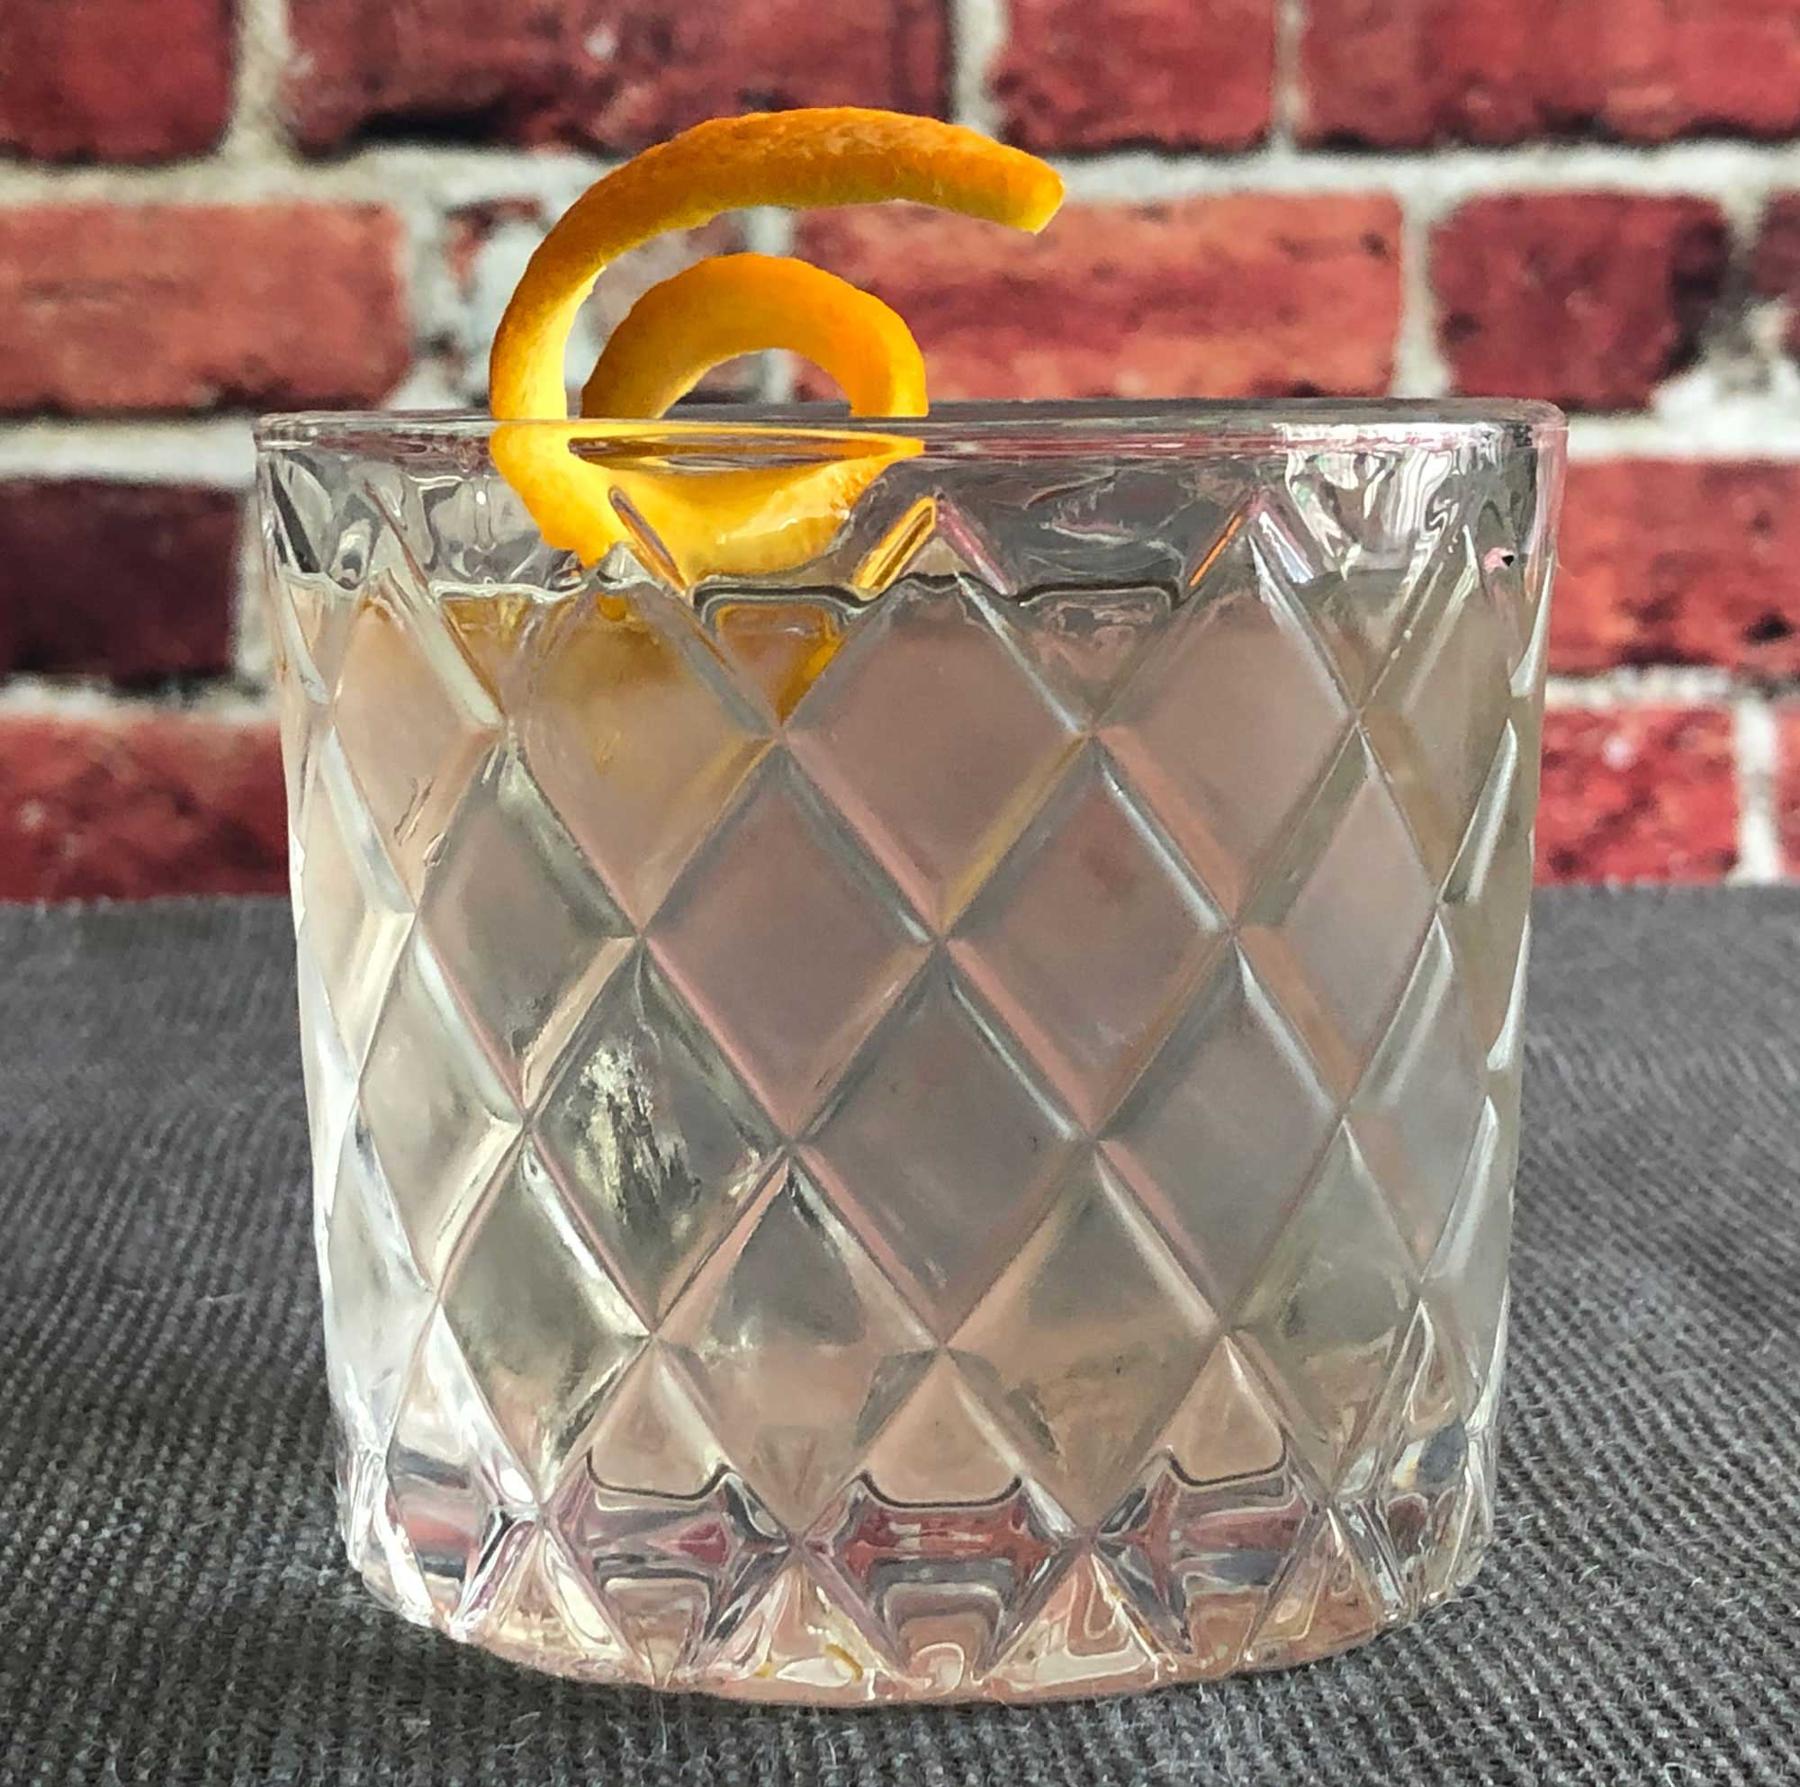 An example of the Pale Horse, the mixed drink (drink), by Brett Bassett, Little Rock, Arkansas, featuring Hayman’s London Dry Gin, Salers Gentian Apéritif, maraschino liqueur, Dolin Dry Vermouth de Chambéry, orange bitters, and orange twist; photo by Lee Edwards